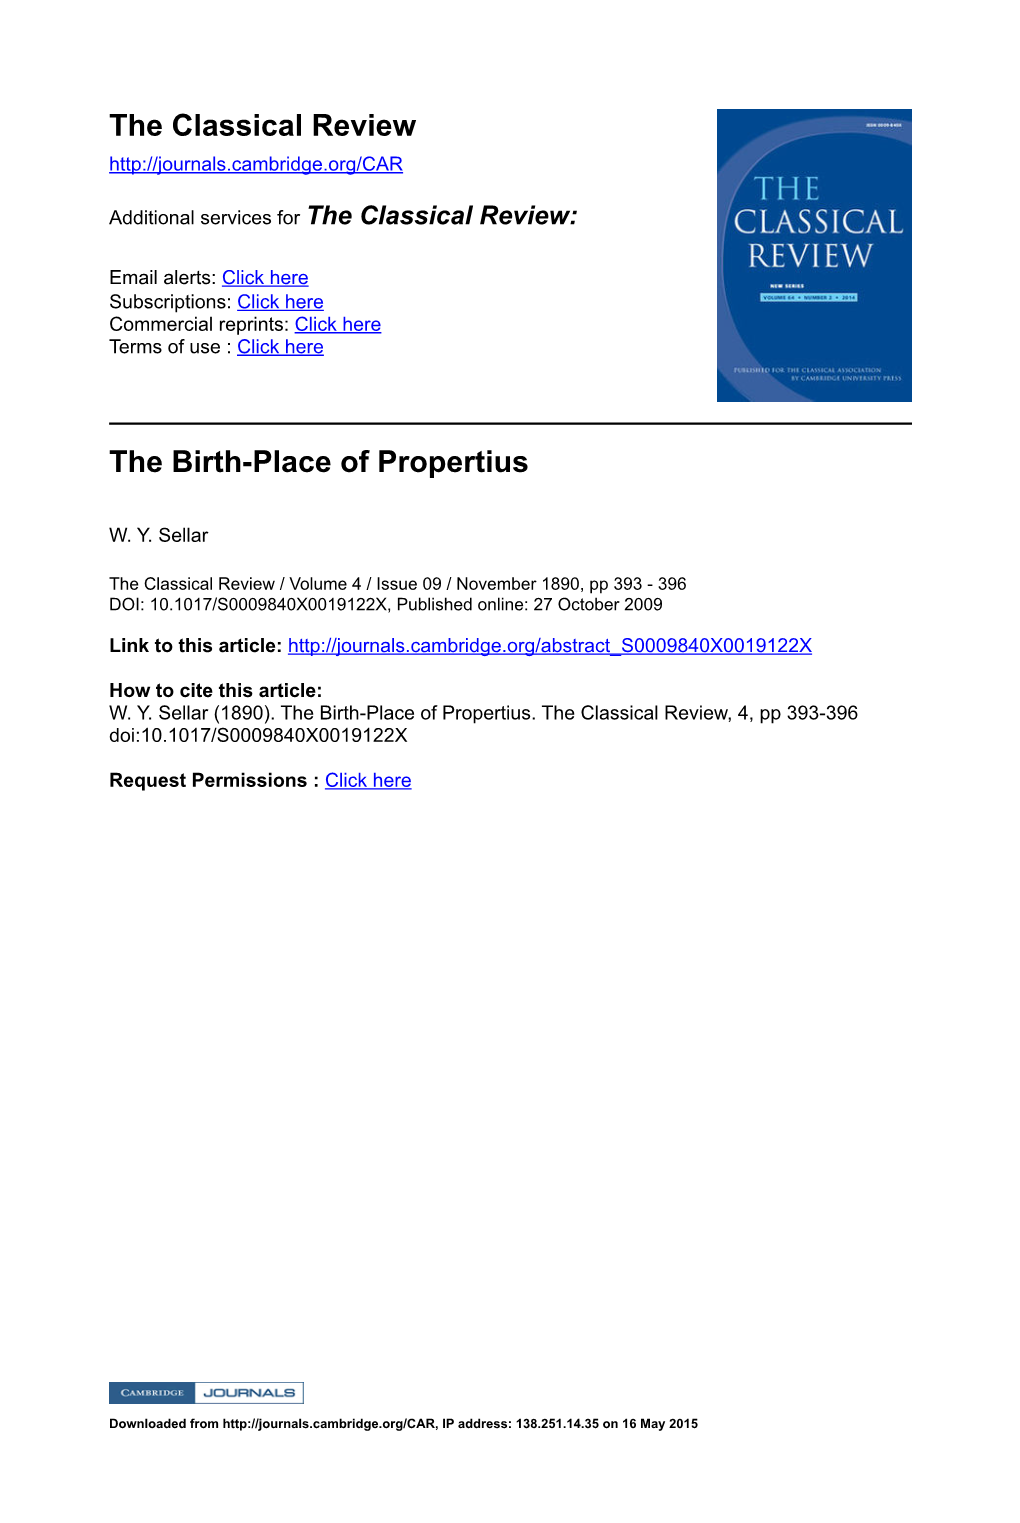 The Birth-Place of Propertius